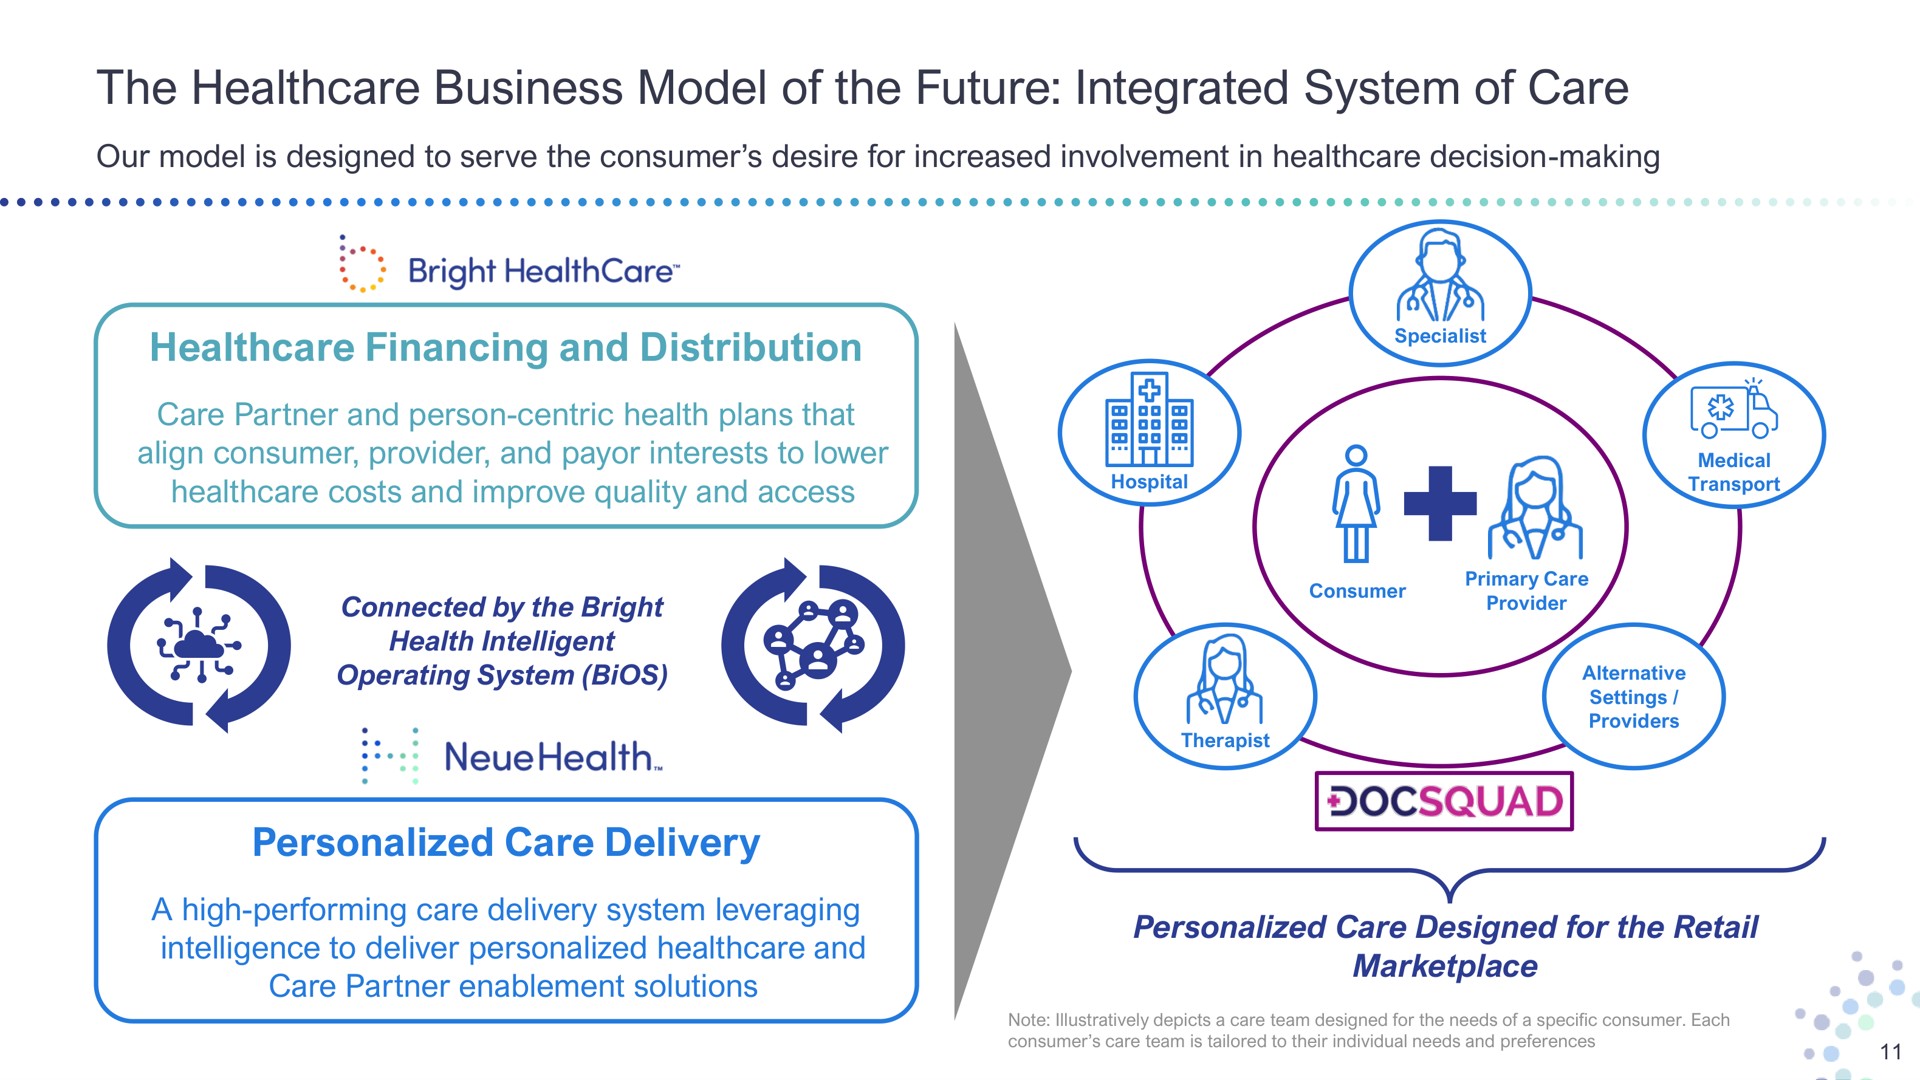 the business model of the future integrated system of care financing and distribution personalized care delivery our is designed to serve consumer desire for increased involvement in decision making bright partner person centric health plans that align consumer provider payor interests to lower costs improve quality access tas connected by bright health intelligent operating bios consumer alternative a high performing leveraging intelligence to deliver designed for retail | Bright Health Group